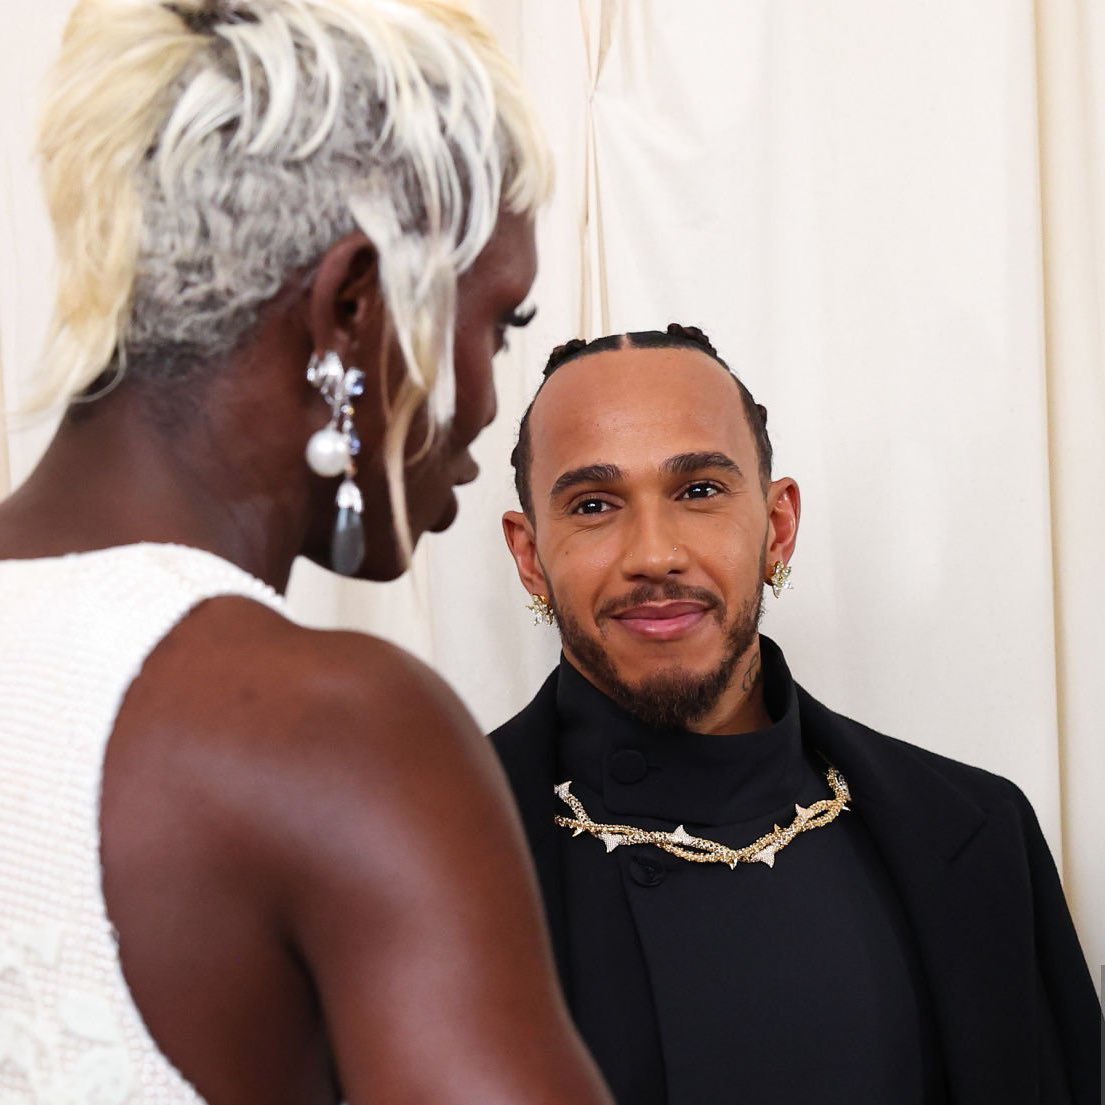 #MetGala Sir Lewis Hamilton and Raye! 

lewis😭 such kind eyes for everyone 😭🥹